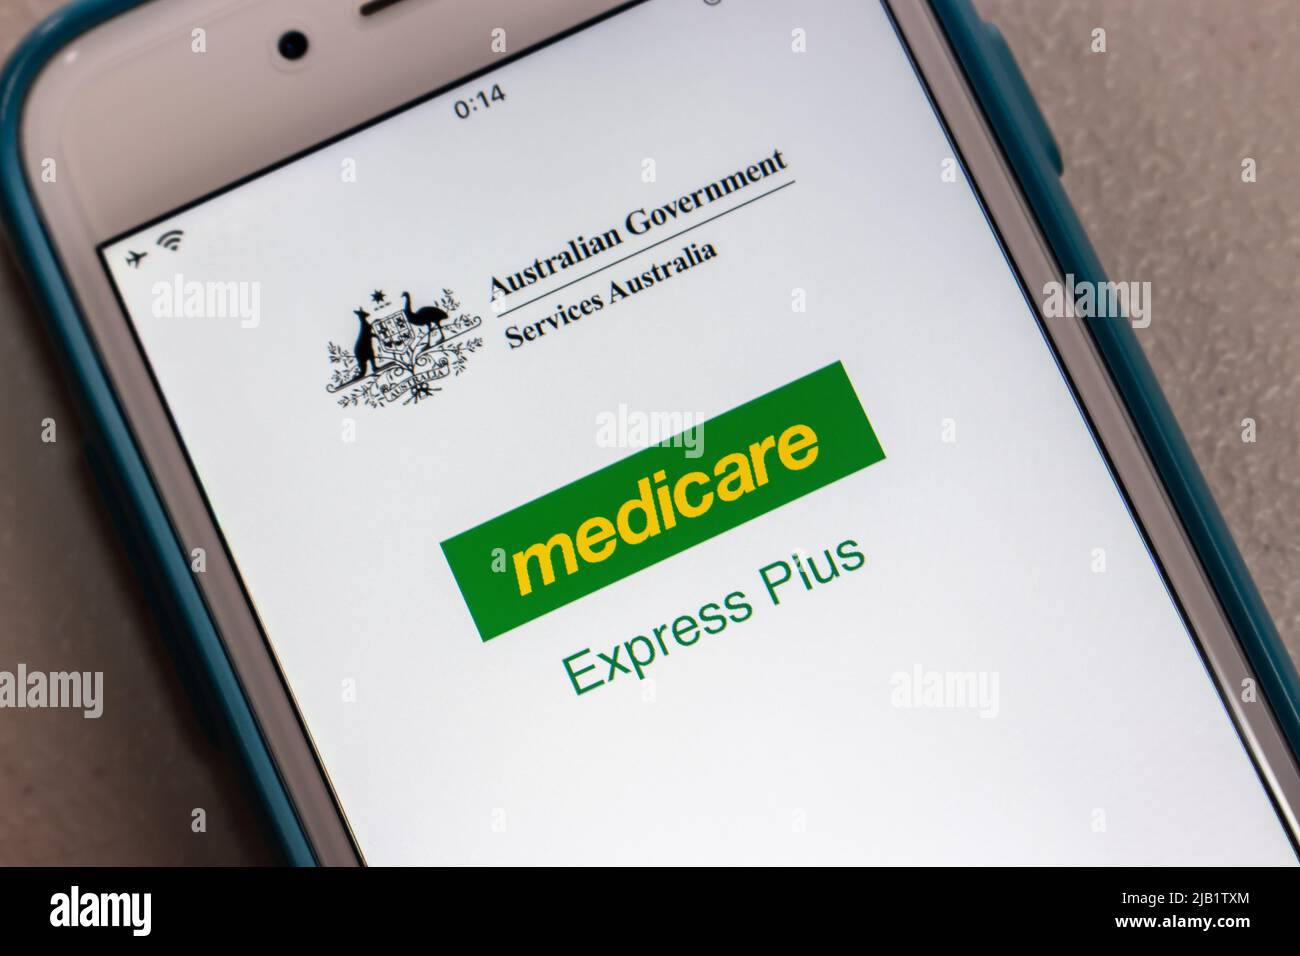 Kumamoto, JAPAN - Oct 18 2021 : Express Plus Medicare app on iPhone. It is medicare management service by Services Australia (Australian Government) Stock Photo